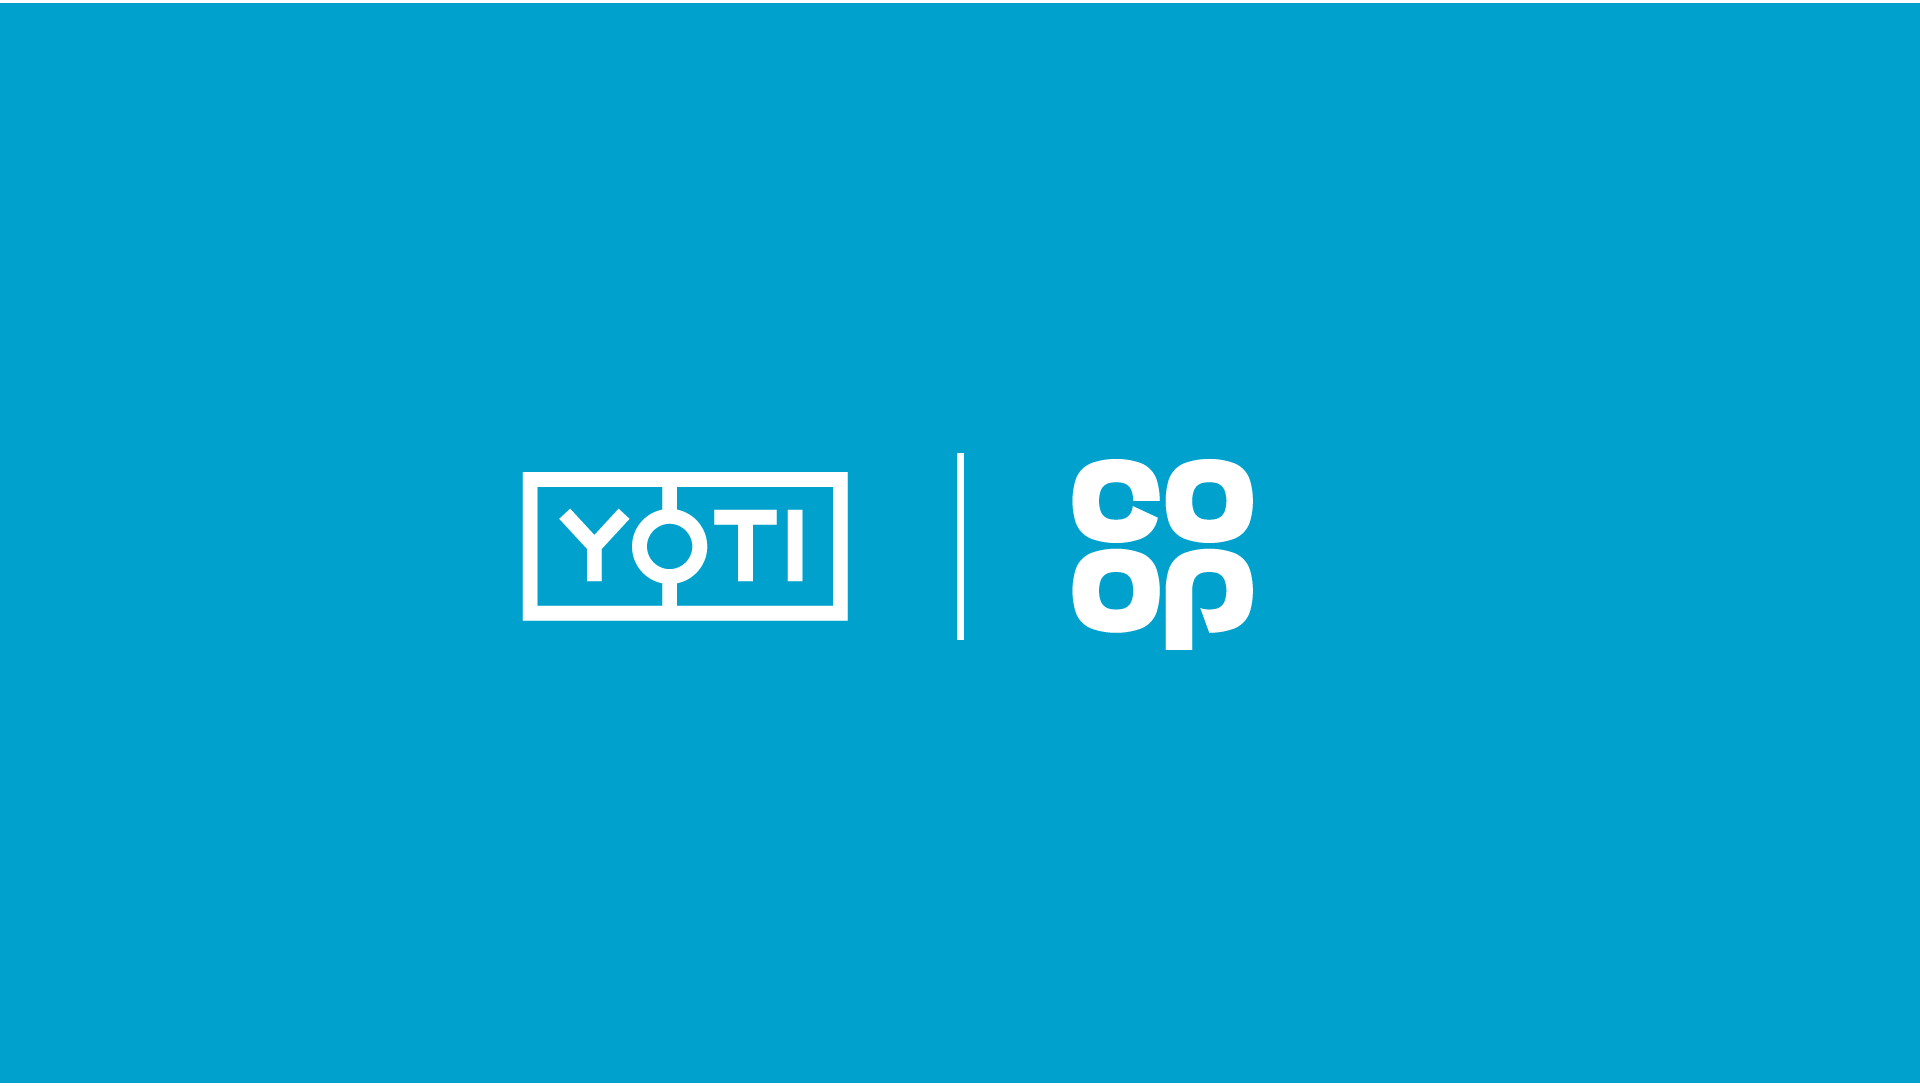 Yoti partners with co-op with our Covid-19 pledge